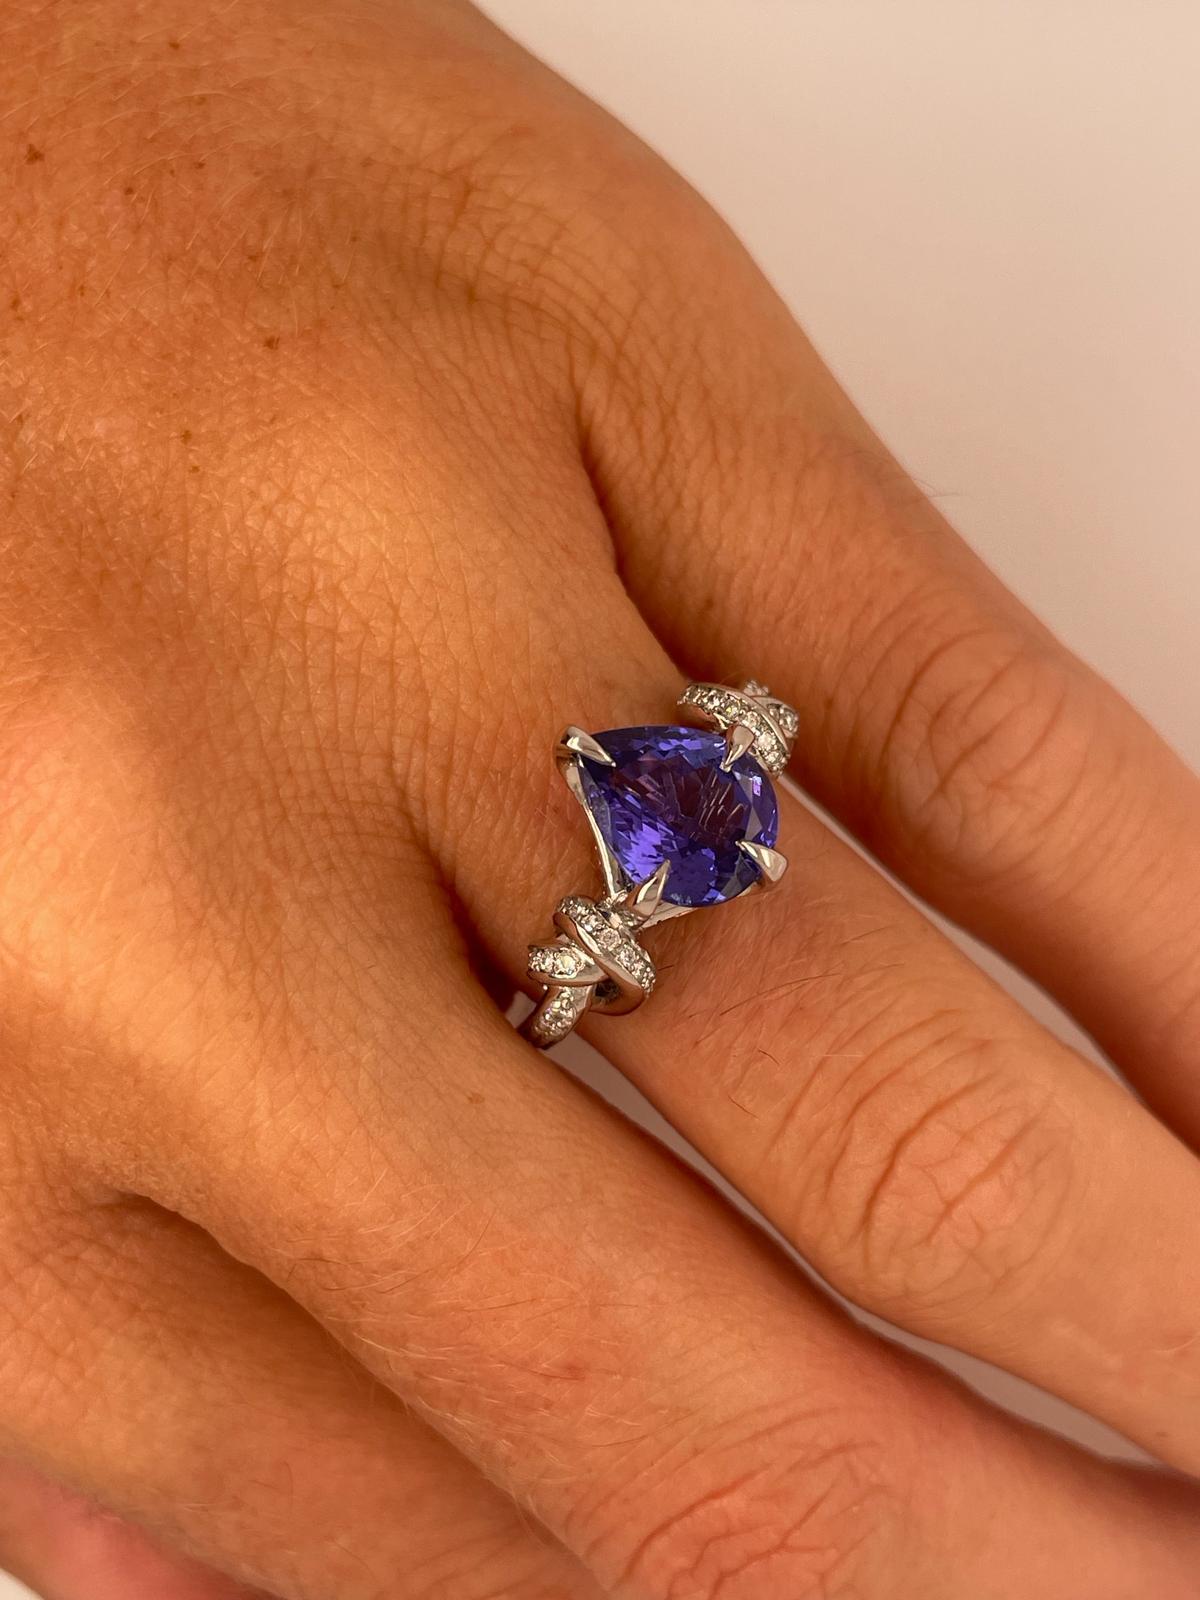 For Sale:  2ct tanzanite and diamond ring in platinum and rose gold  Forget me knot ring  14